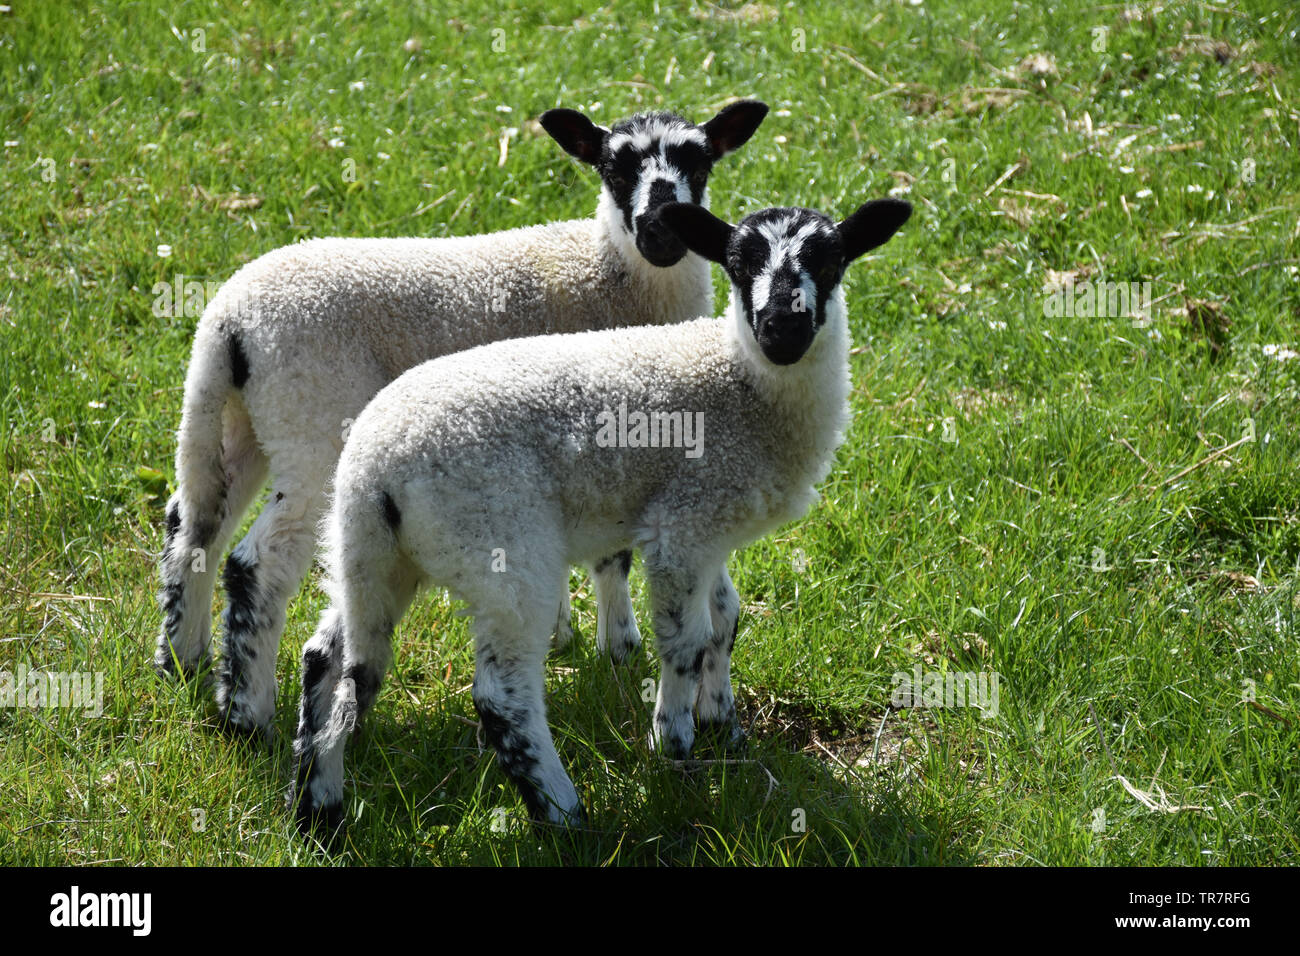 Cute pair of twin speckled lambs in a grassy field. Stock Photo